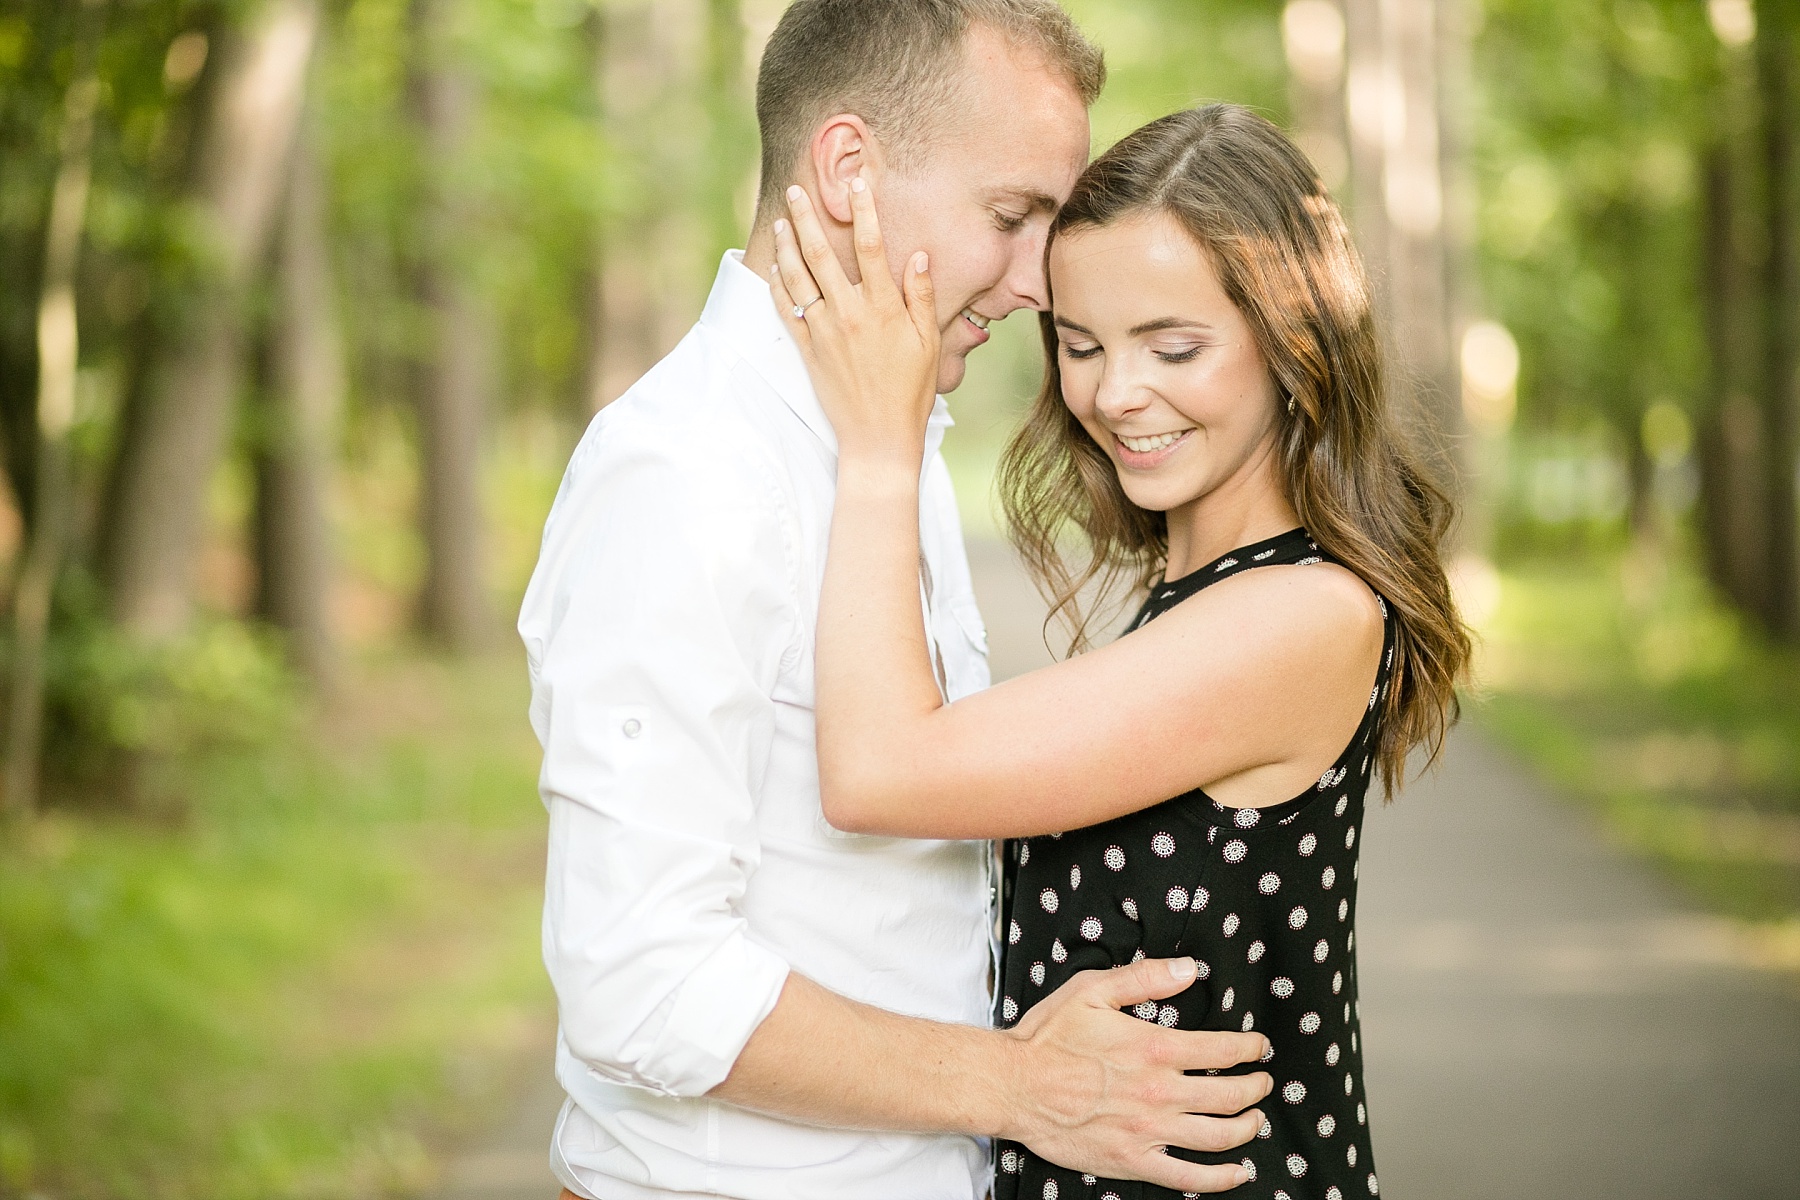 An adventurous Brunet Island State Park engagement session tucked in the northwoods of Wisconsin.